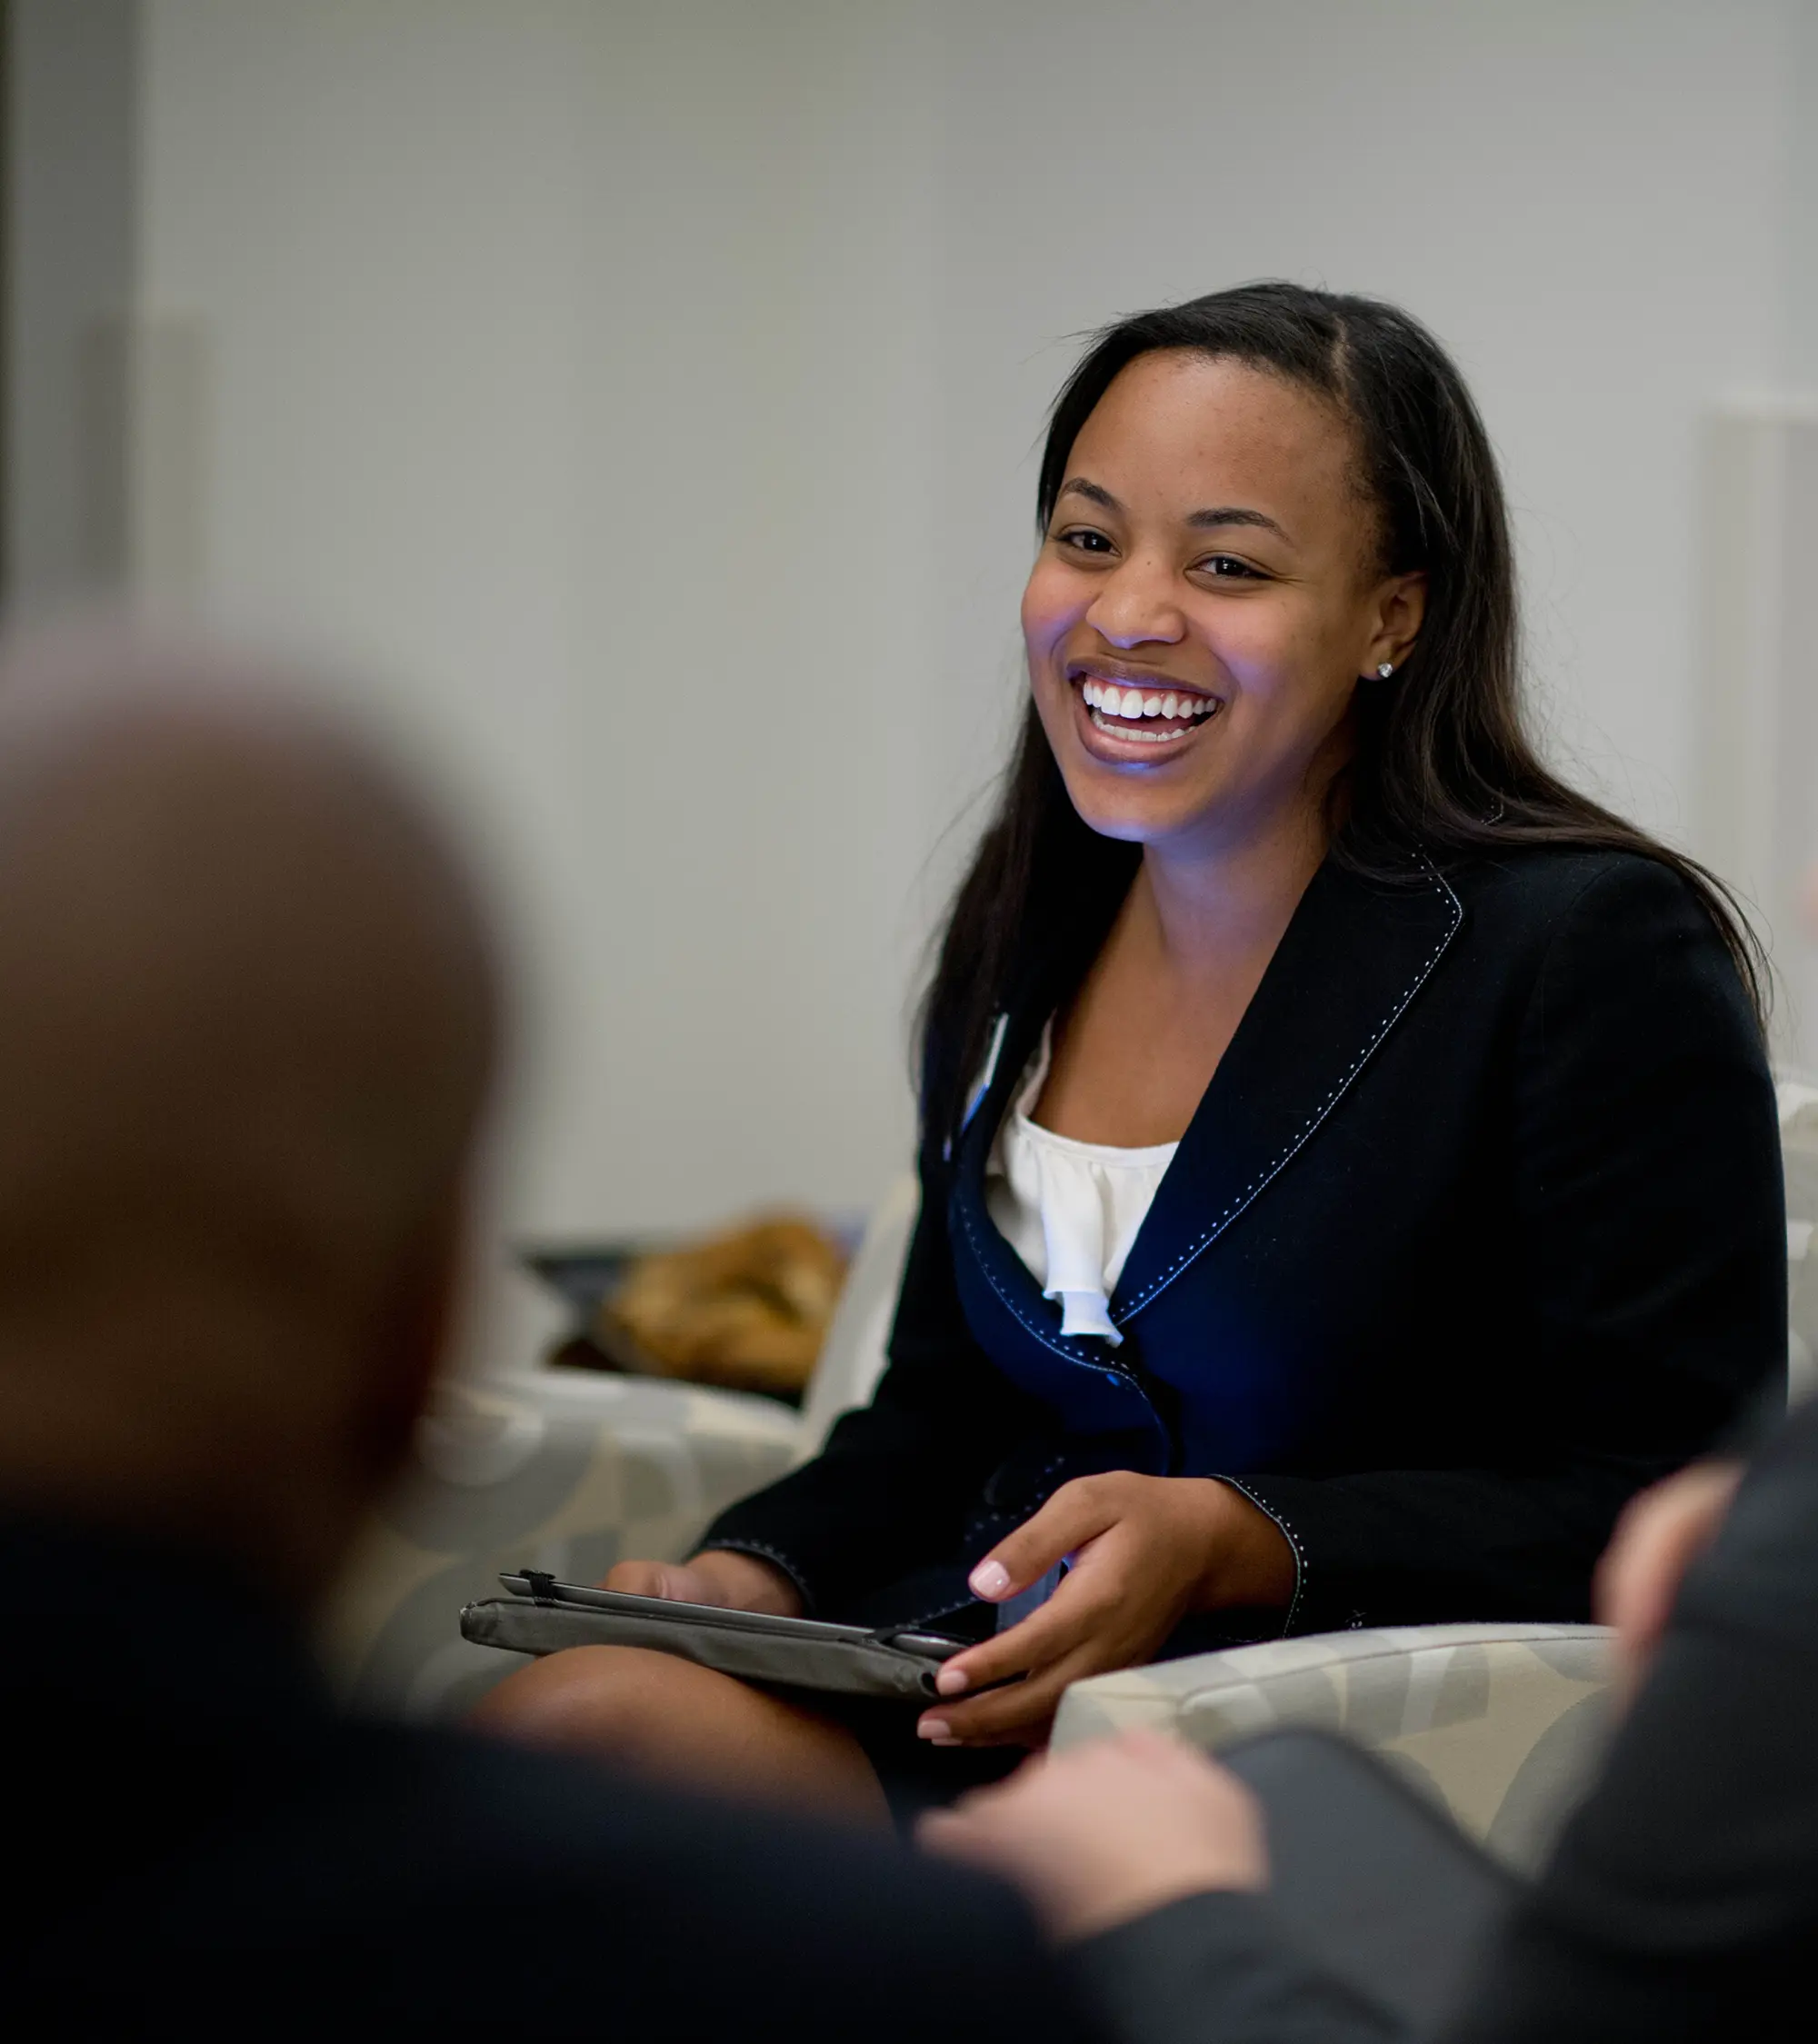 woman holding an iPad while smiling and talking to someone at work